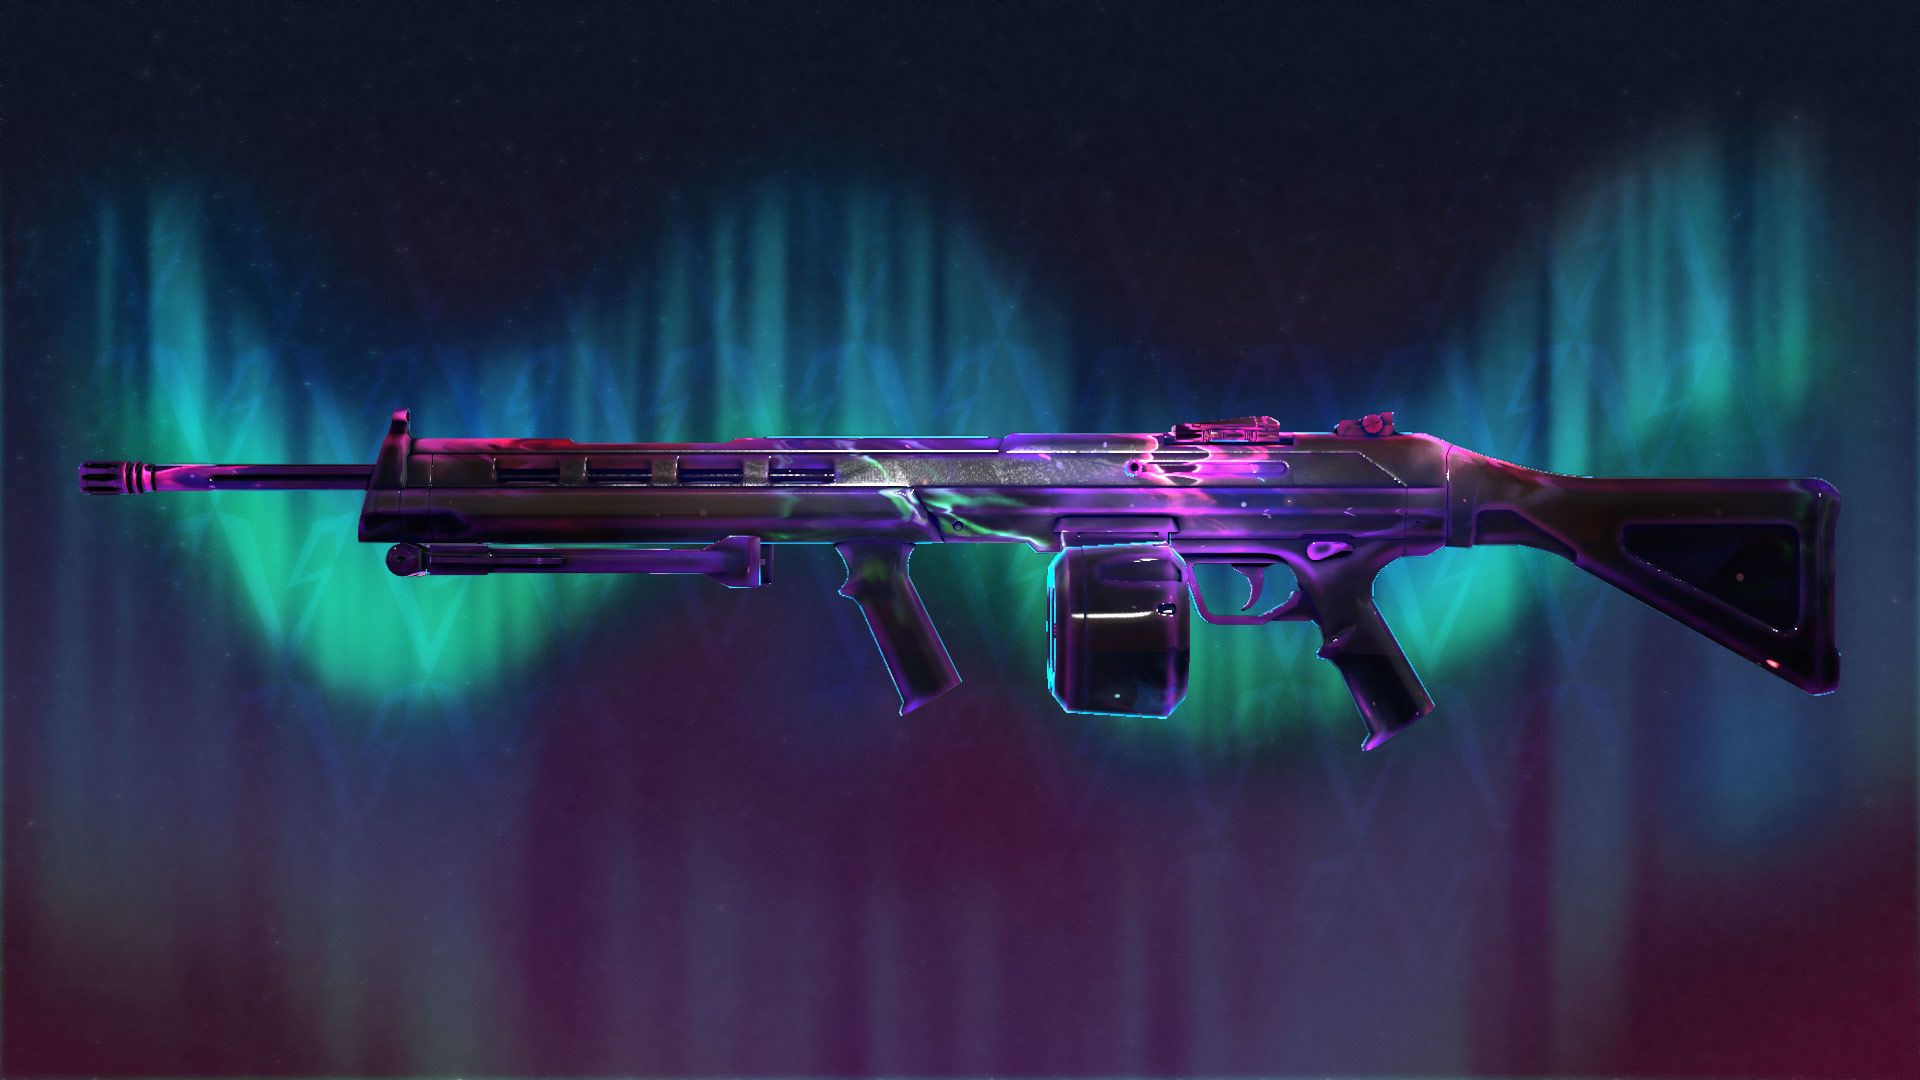 Valorant Nebula skins are live in game store: How to purchase the Nebula collection?